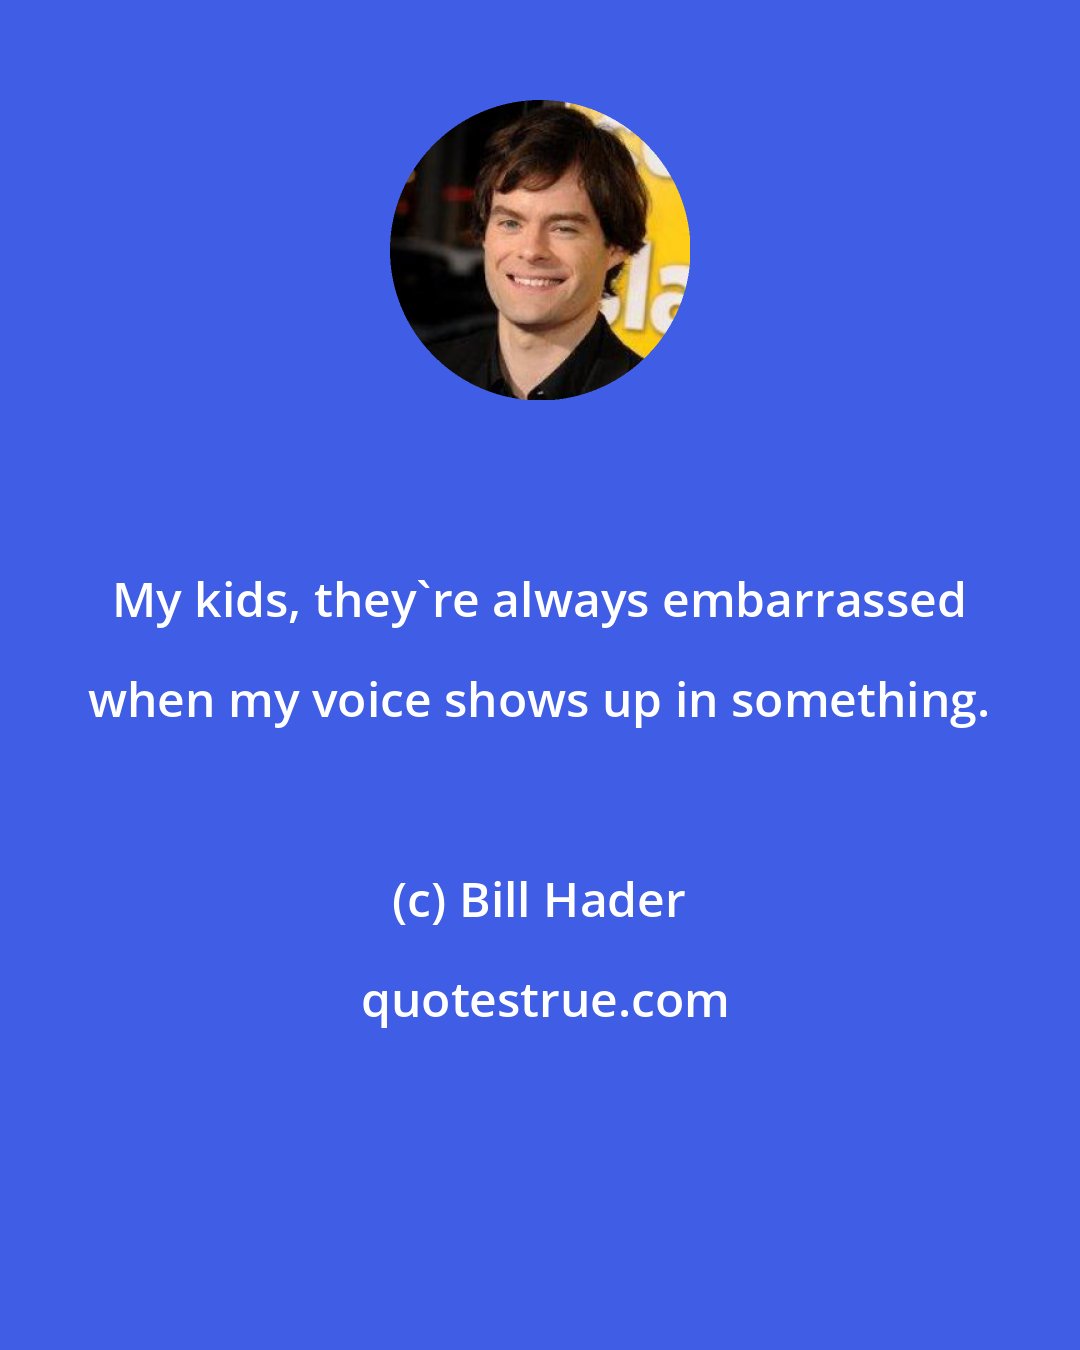 Bill Hader: My kids, they're always embarrassed when my voice shows up in something.